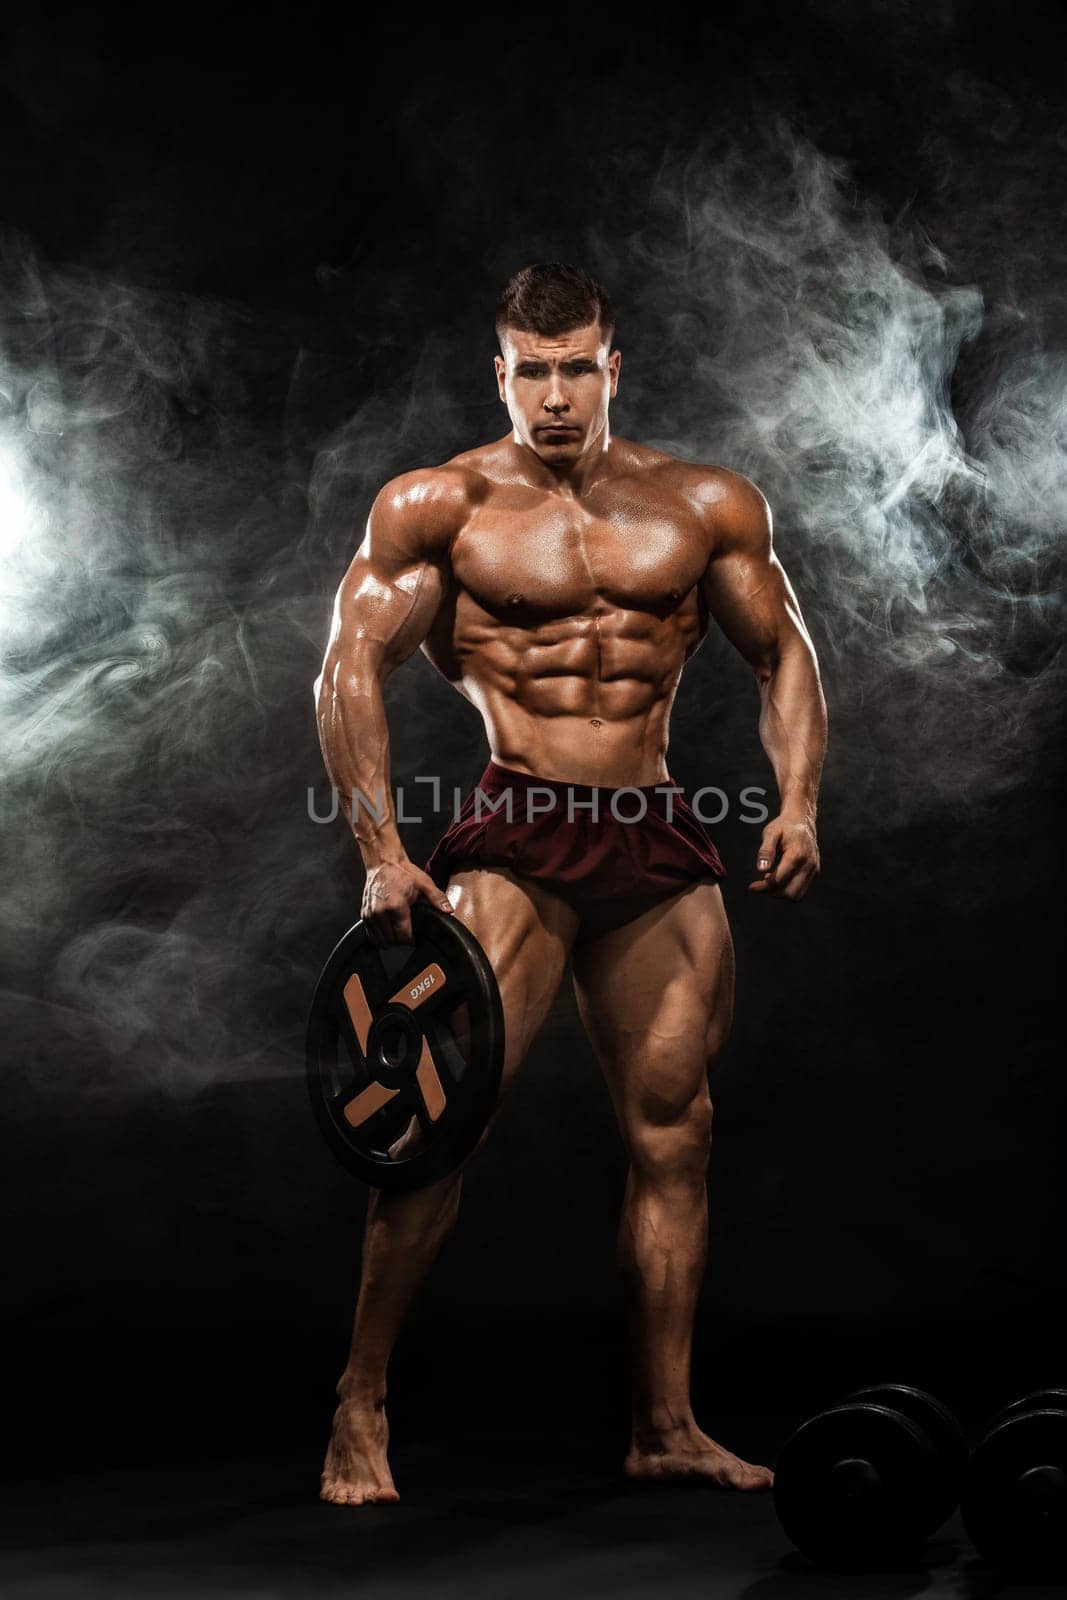 Brutal strong muscular bodybuilder athletic man pumping up muscles with barbell on black background. Workout bodybuilding concept. Copy space for sport nutrition ads. by MikeOrlov